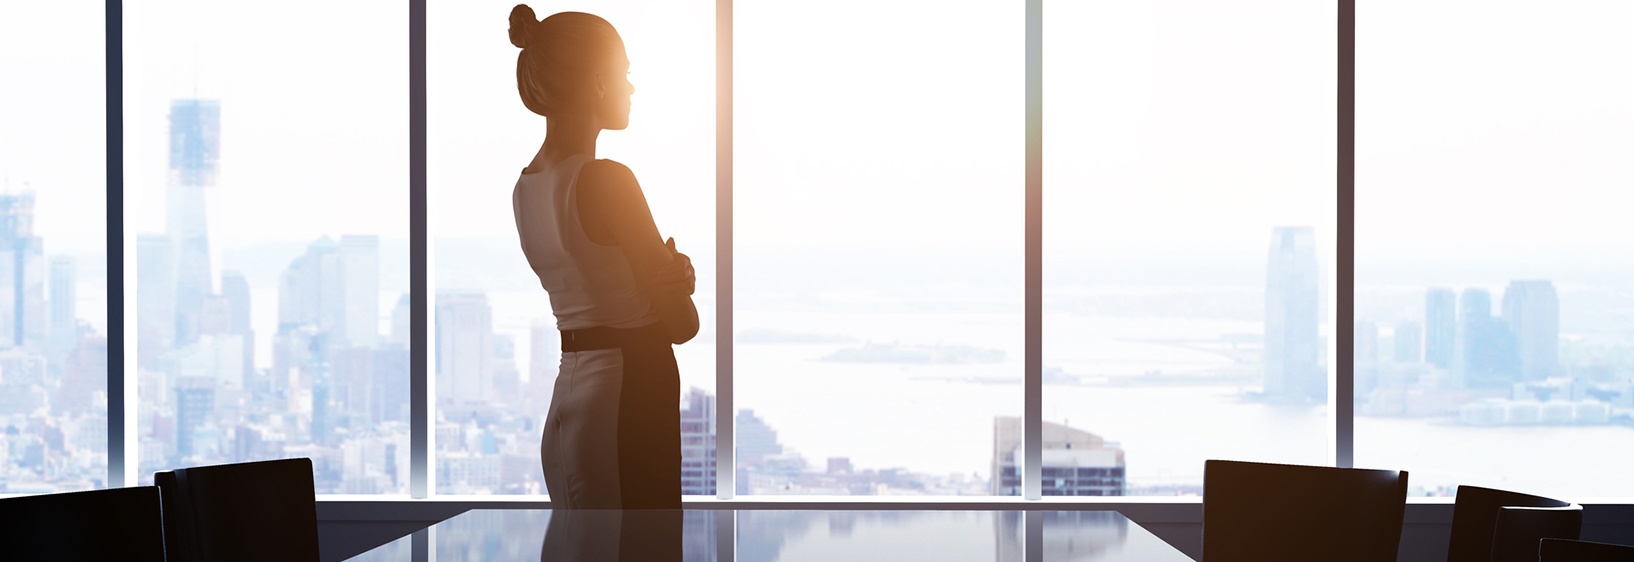 Why It’s Time Financial Services Brands Start Marketing to Women